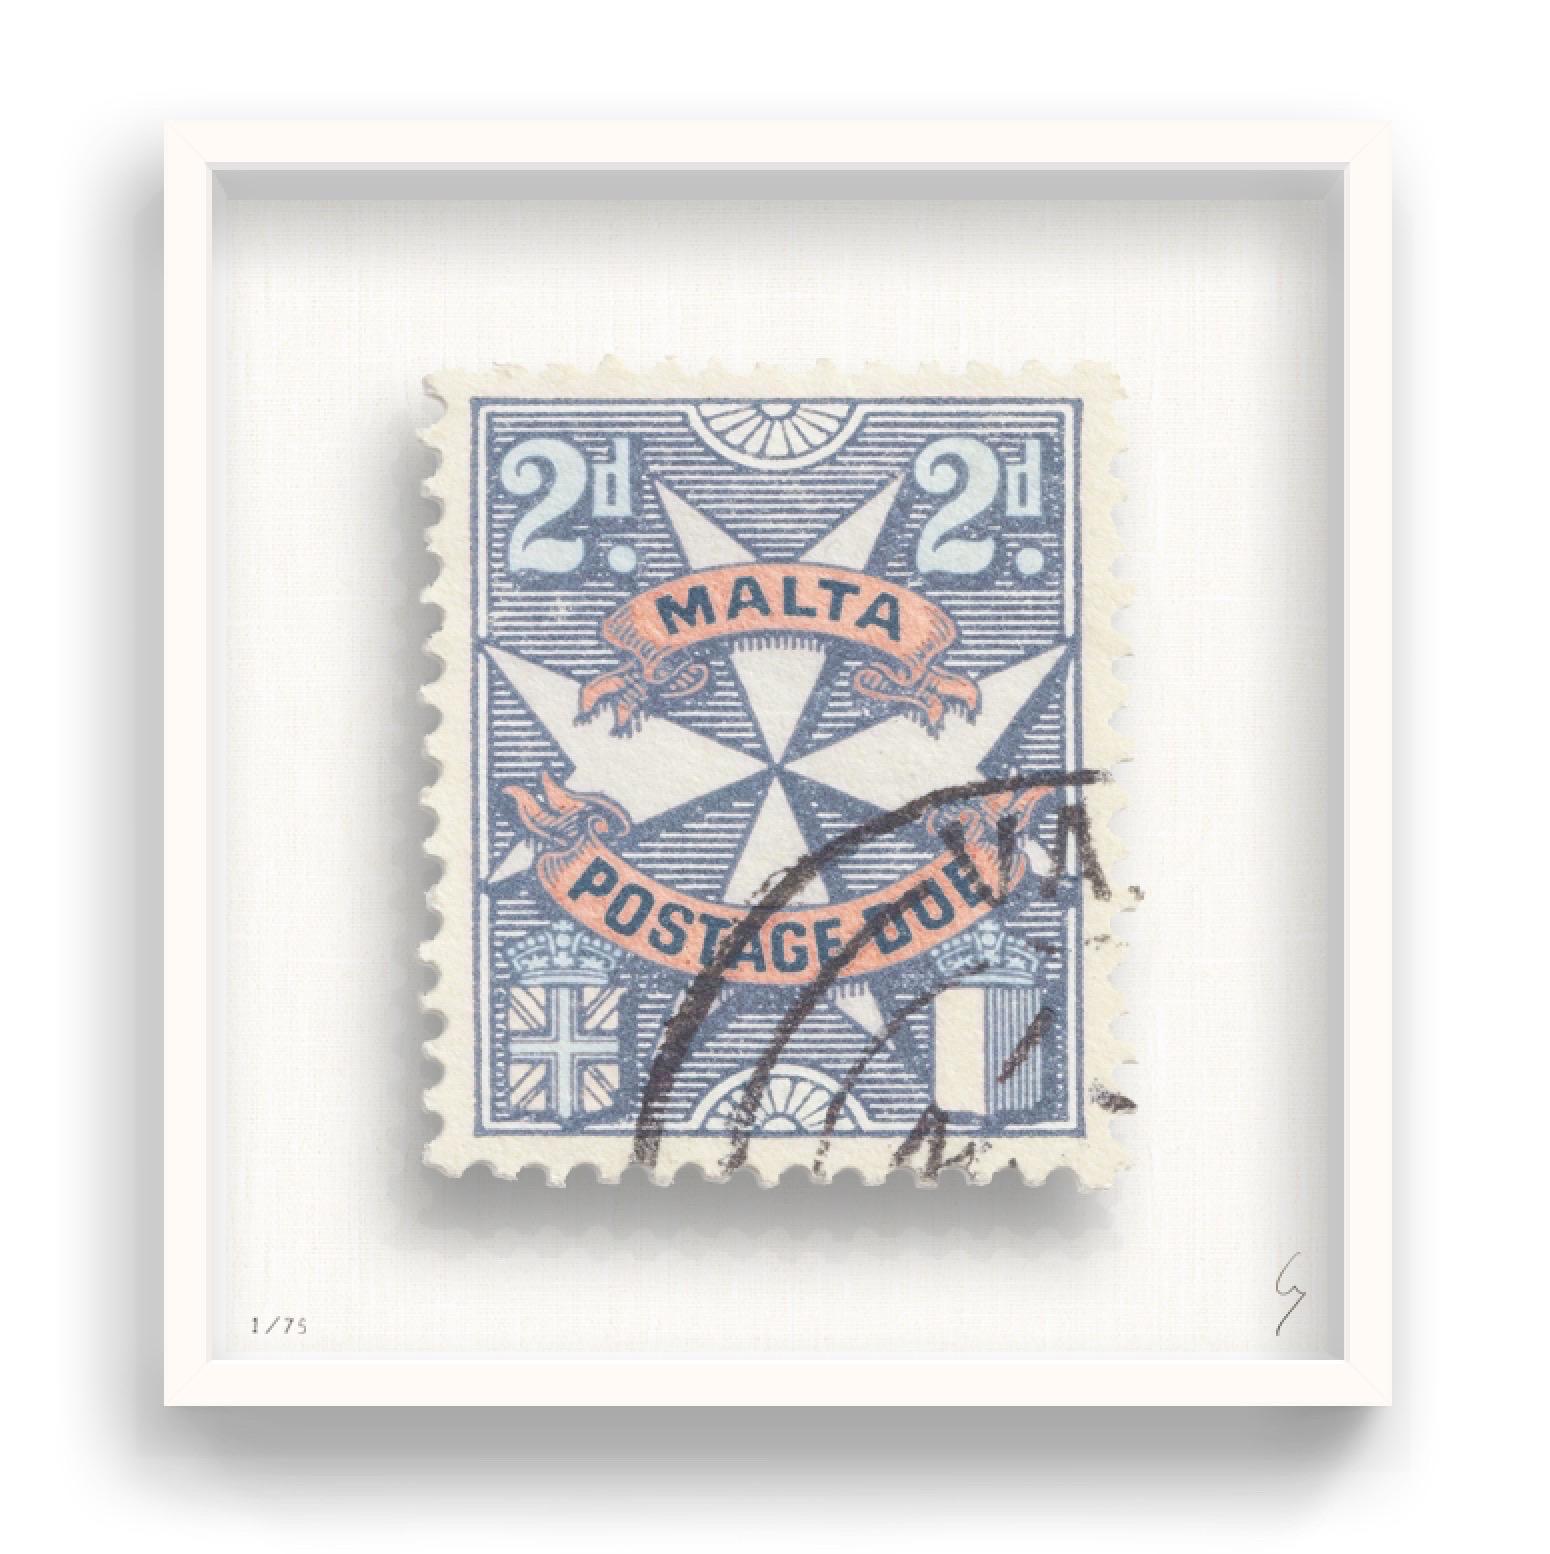 Guy Gee, Malta (medium)

Hand-engraved print on 350gsm on G.F Smith card
53 x 56cm (20 4/5 x 22 2/5 in)
Frame included 
Edition of 75 

Each artwork by Guy had been digitally reimagined from an original postage stamp. Cut out and finished by hand,